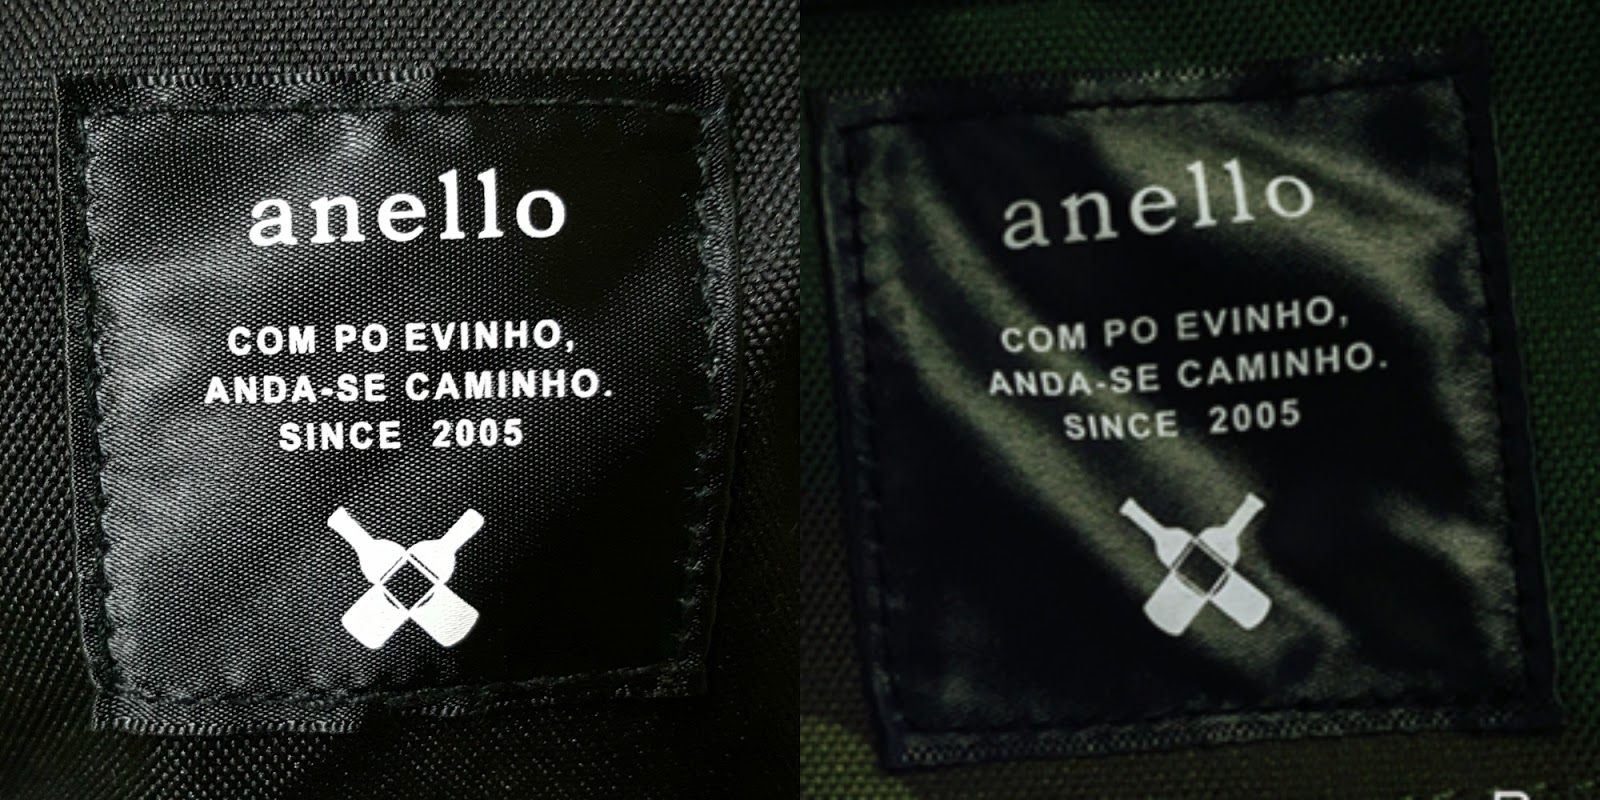 How I Scored My Anello Backpack…Is it Legit or Fake? – The Morena